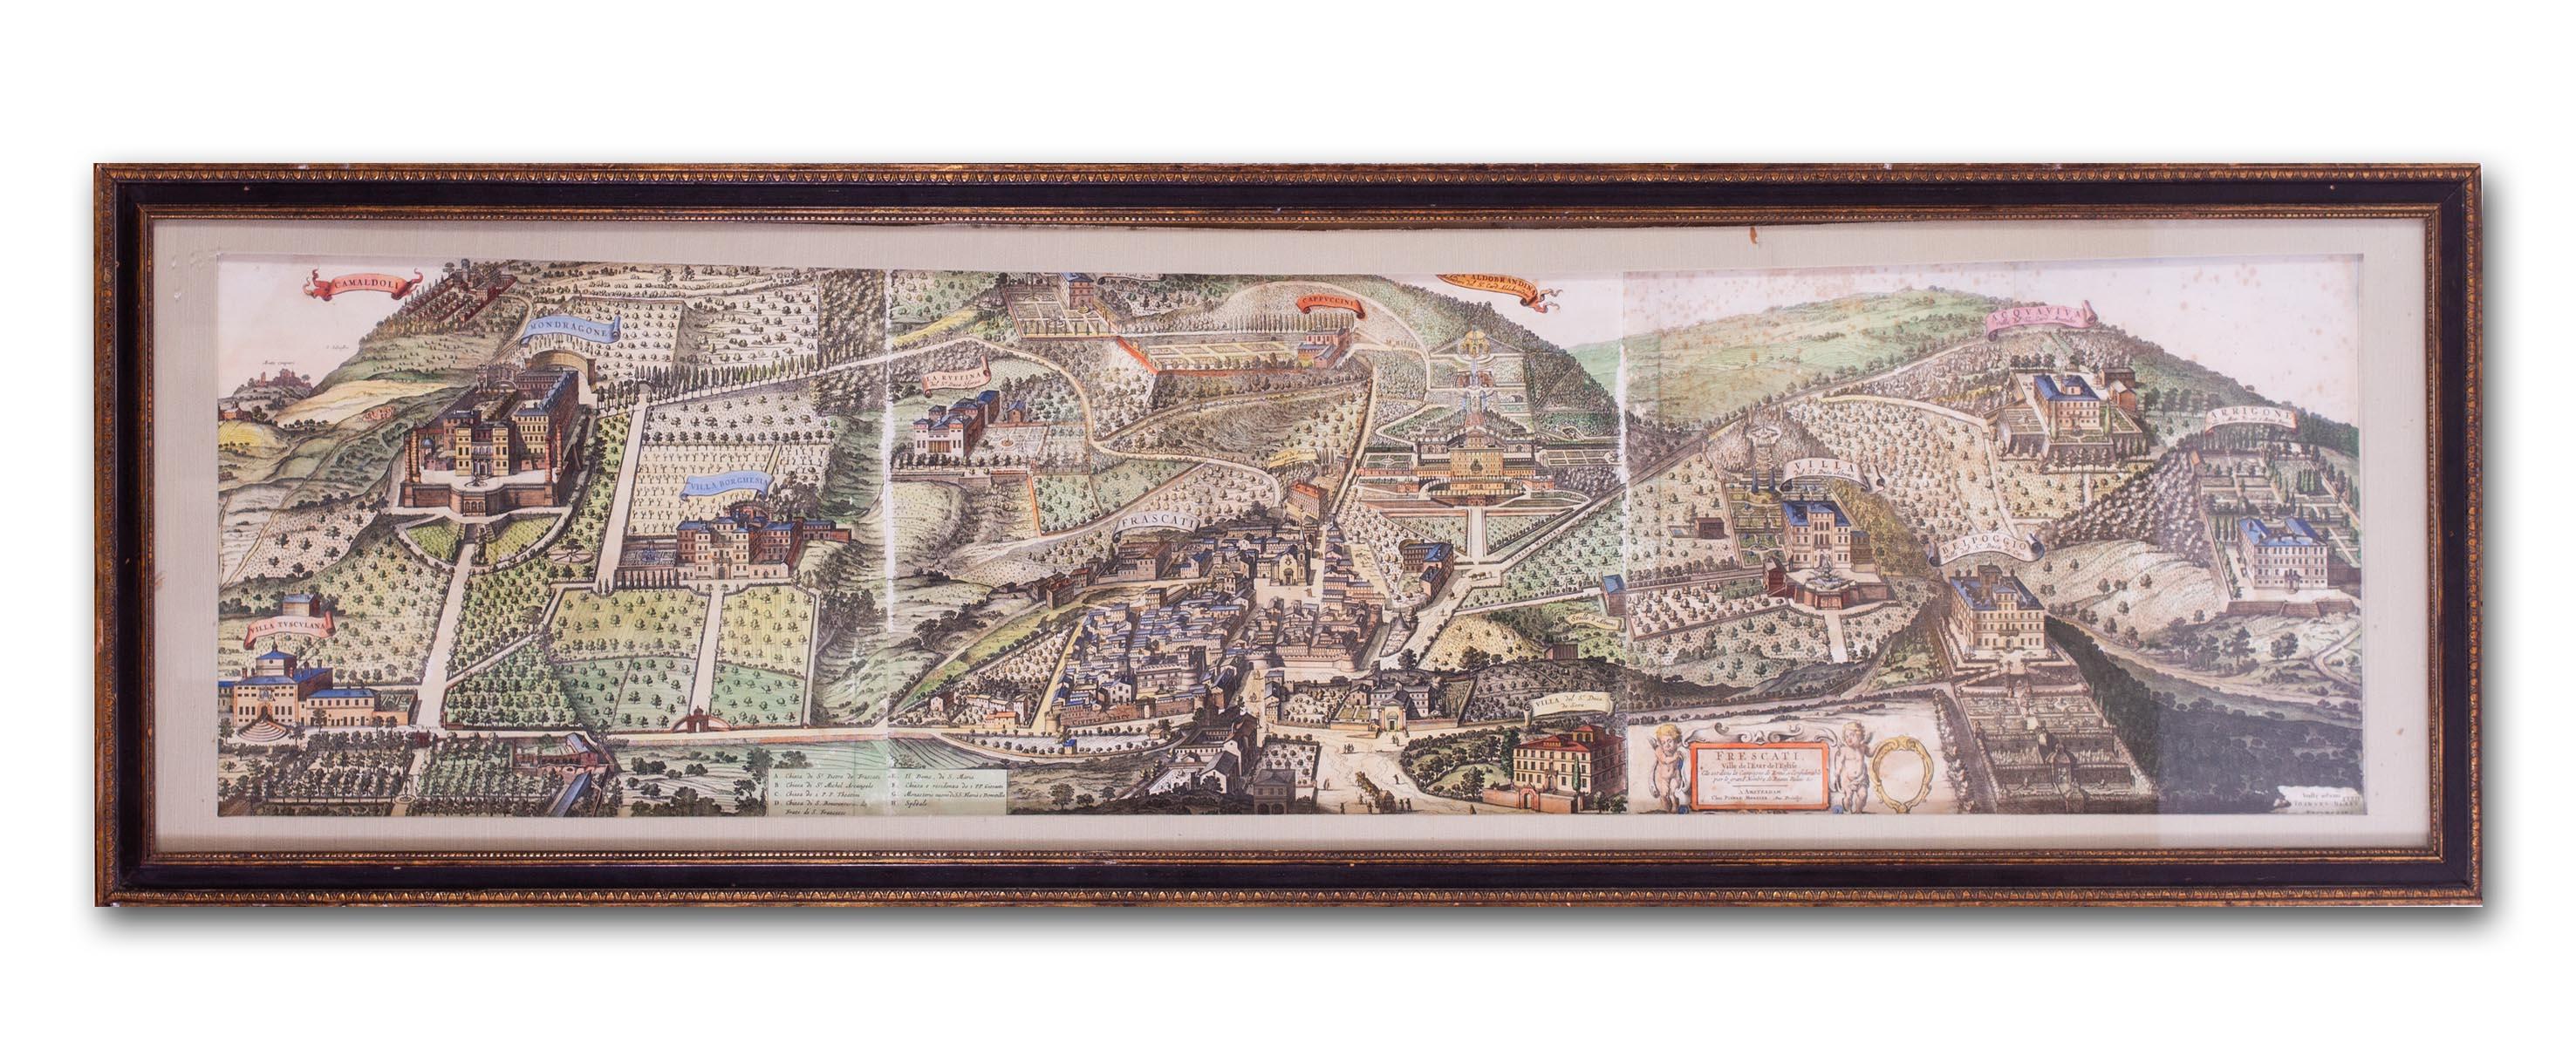 Johannes Blaeu (Dutch, 1596-1673)
A Panoramic view of Roman villas of Frascati in the Alban Hills of the Latium region of Italy
Hand coloured copper engraving on three sheets of laid paper published by Pierre Mortier, Amsterdam, 1704 – 05
Panorama